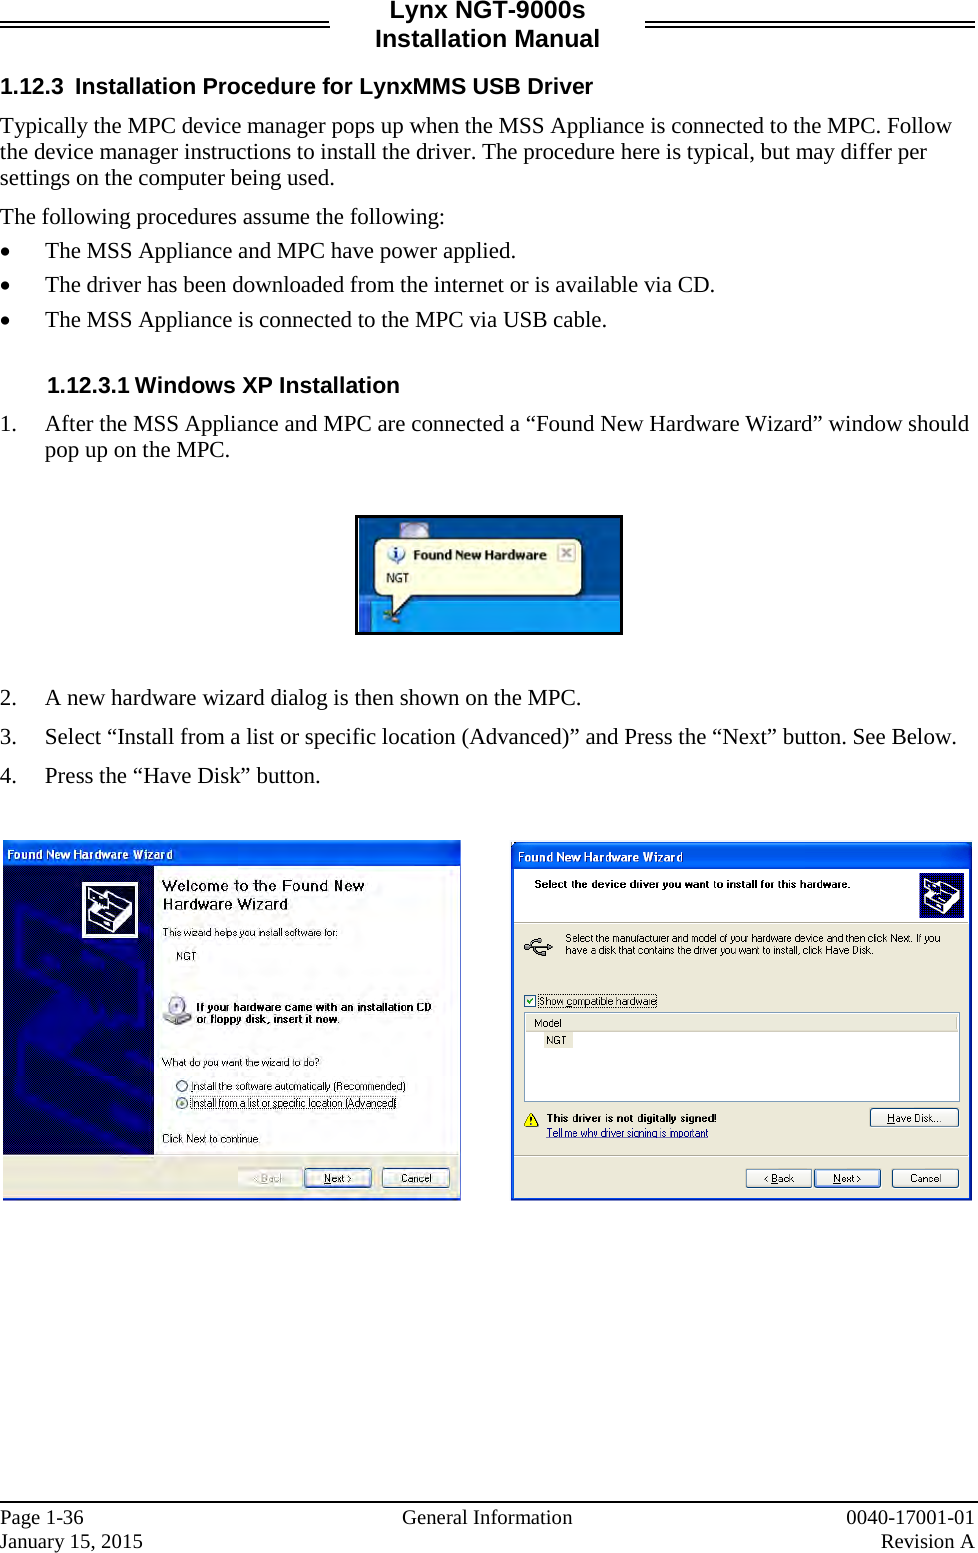 Lynx NGT-9000s Installation Manual  1.12.3 Installation Procedure for LynxMMS USB Driver Typically the MPC device manager pops up when the MSS Appliance is connected to the MPC. Follow the device manager instructions to install the driver. The procedure here is typical, but may differ per settings on the computer being used.  The following procedures assume the following:  • The MSS Appliance and MPC have power applied. • The driver has been downloaded from the internet or is available via CD.   • The MSS Appliance is connected to the MPC via USB cable.  1.12.3.1 Windows XP Installation  1. After the MSS Appliance and MPC are connected a “Found New Hardware Wizard” window should pop up on the MPC.     2. A new hardware wizard dialog is then shown on the MPC.  3. Select “Install from a list or specific location (Advanced)” and Press the “Next” button. See Below. 4. Press the “Have Disk” button.                 Page 1-36   General Information 0040-17001-01 January 15, 2015    Revision A  